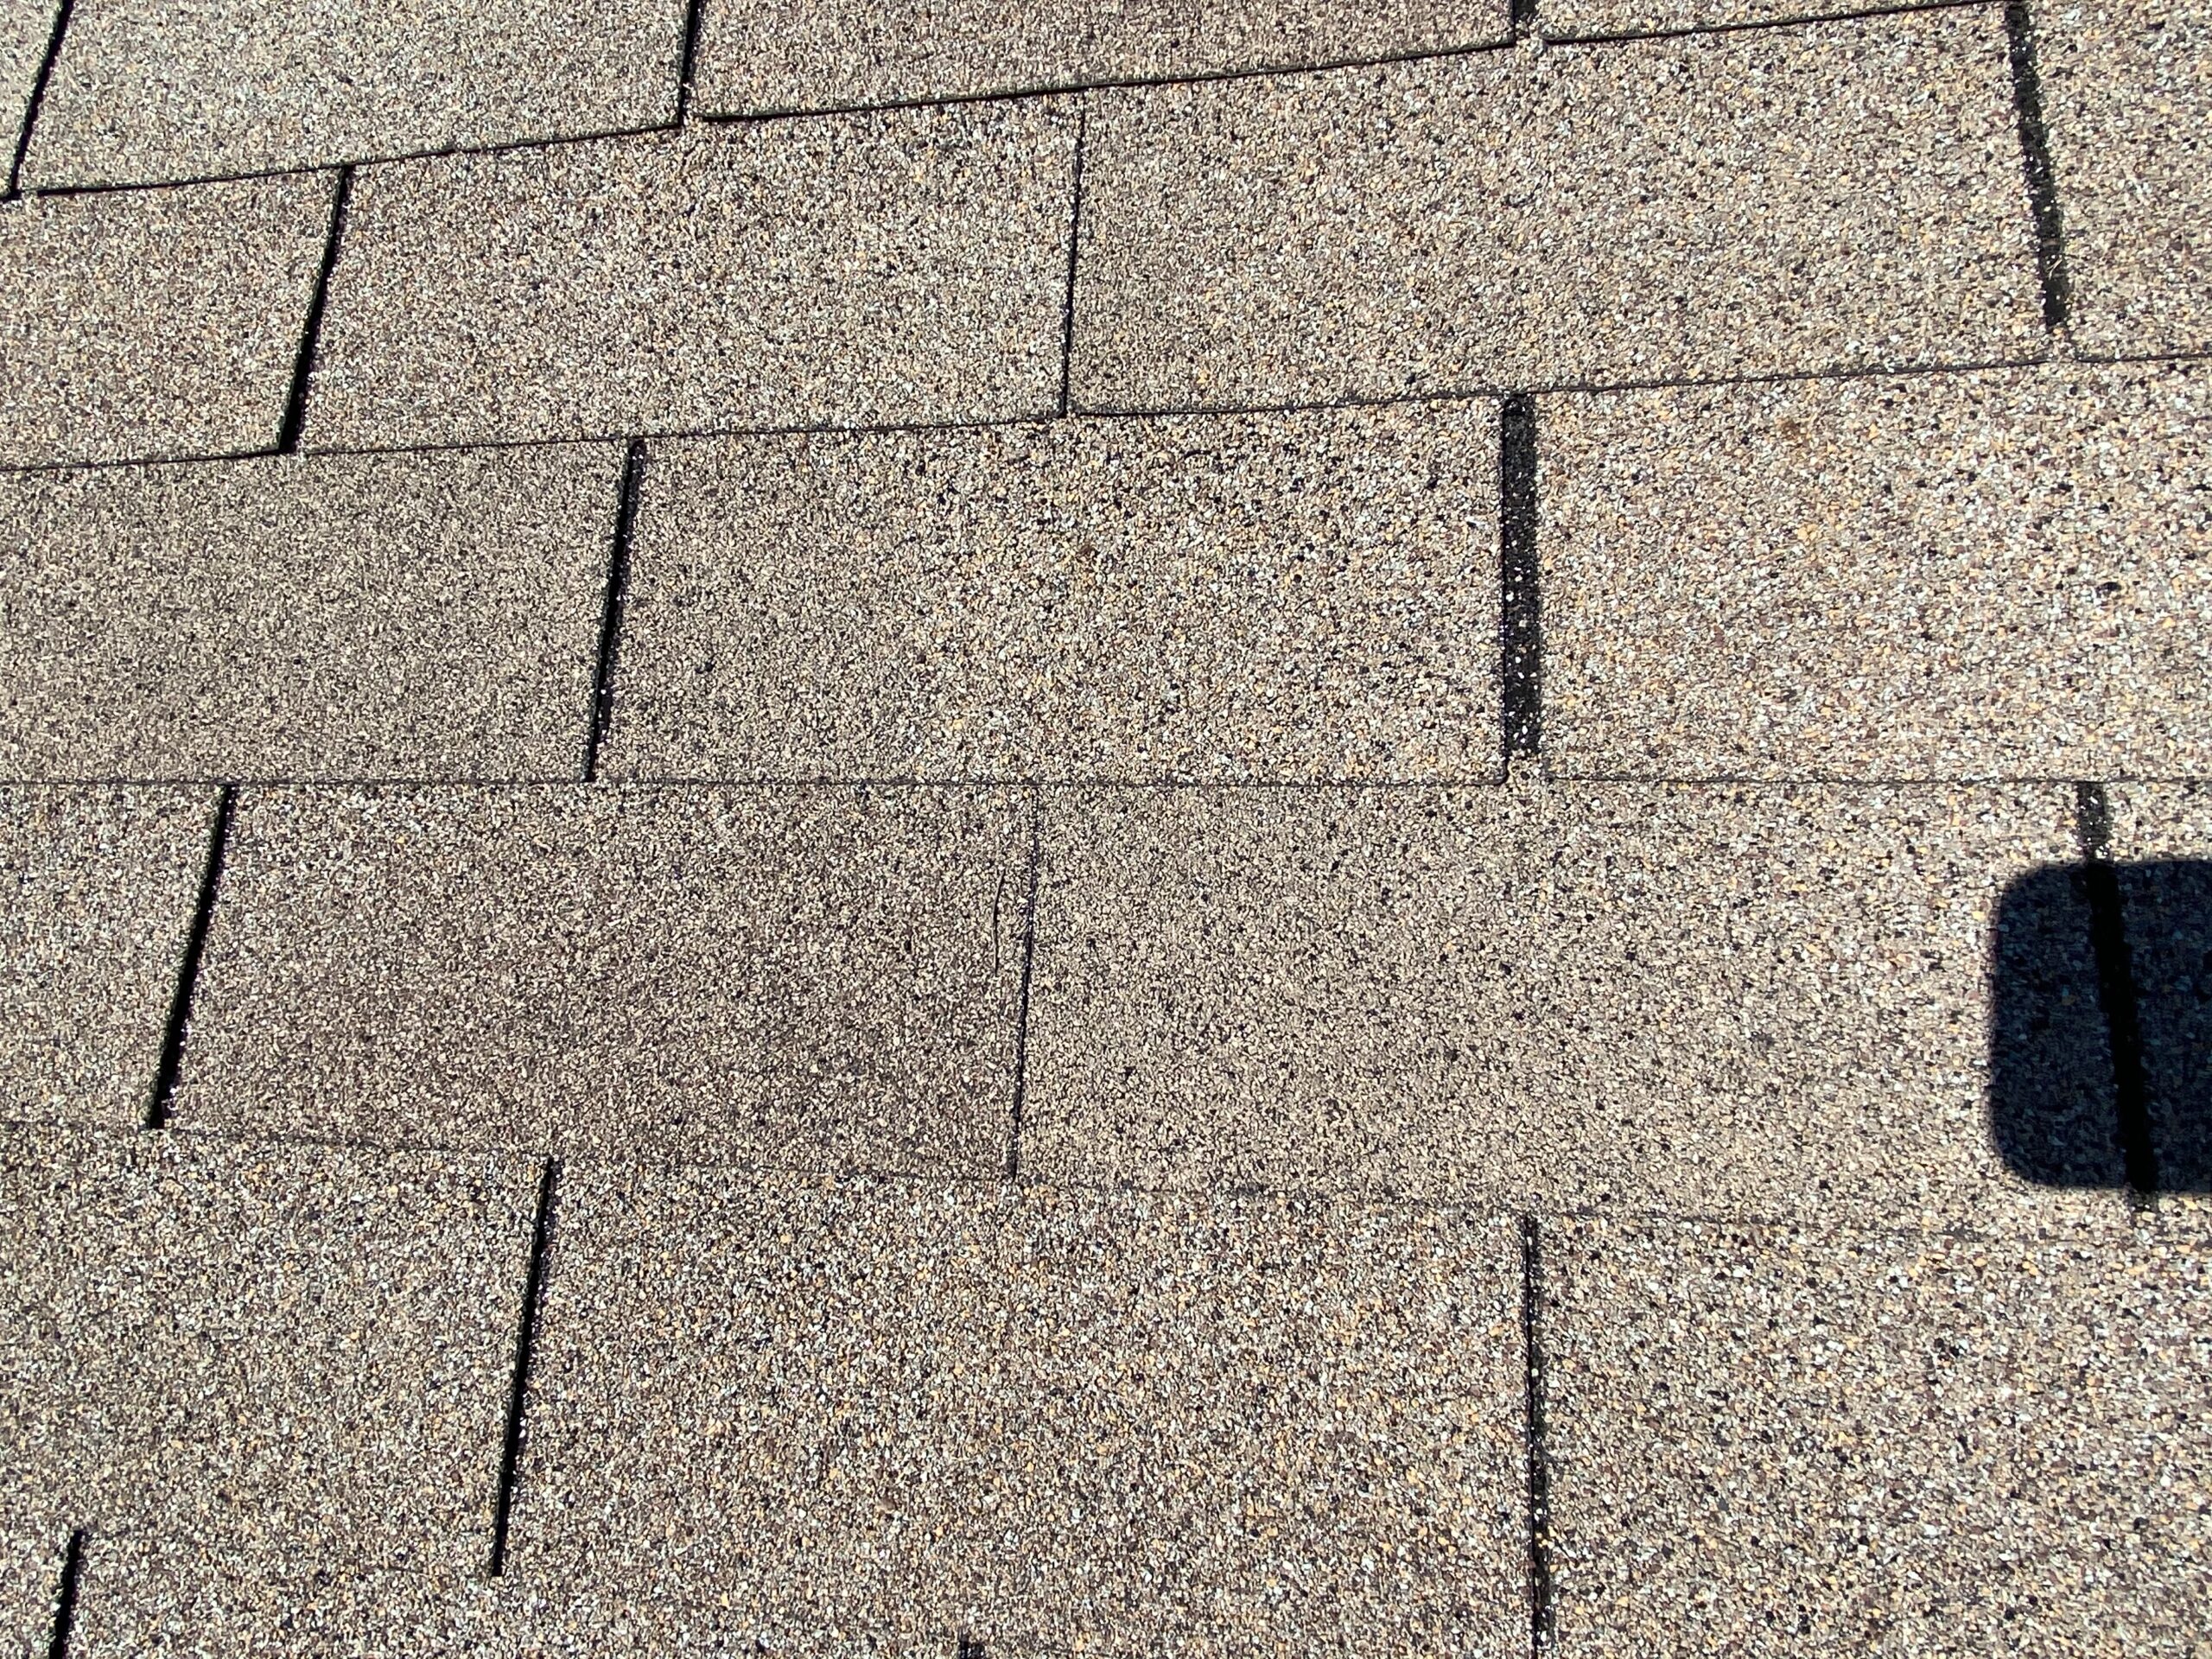 This is a picture of shingles that are misaligned on a gray colored roof